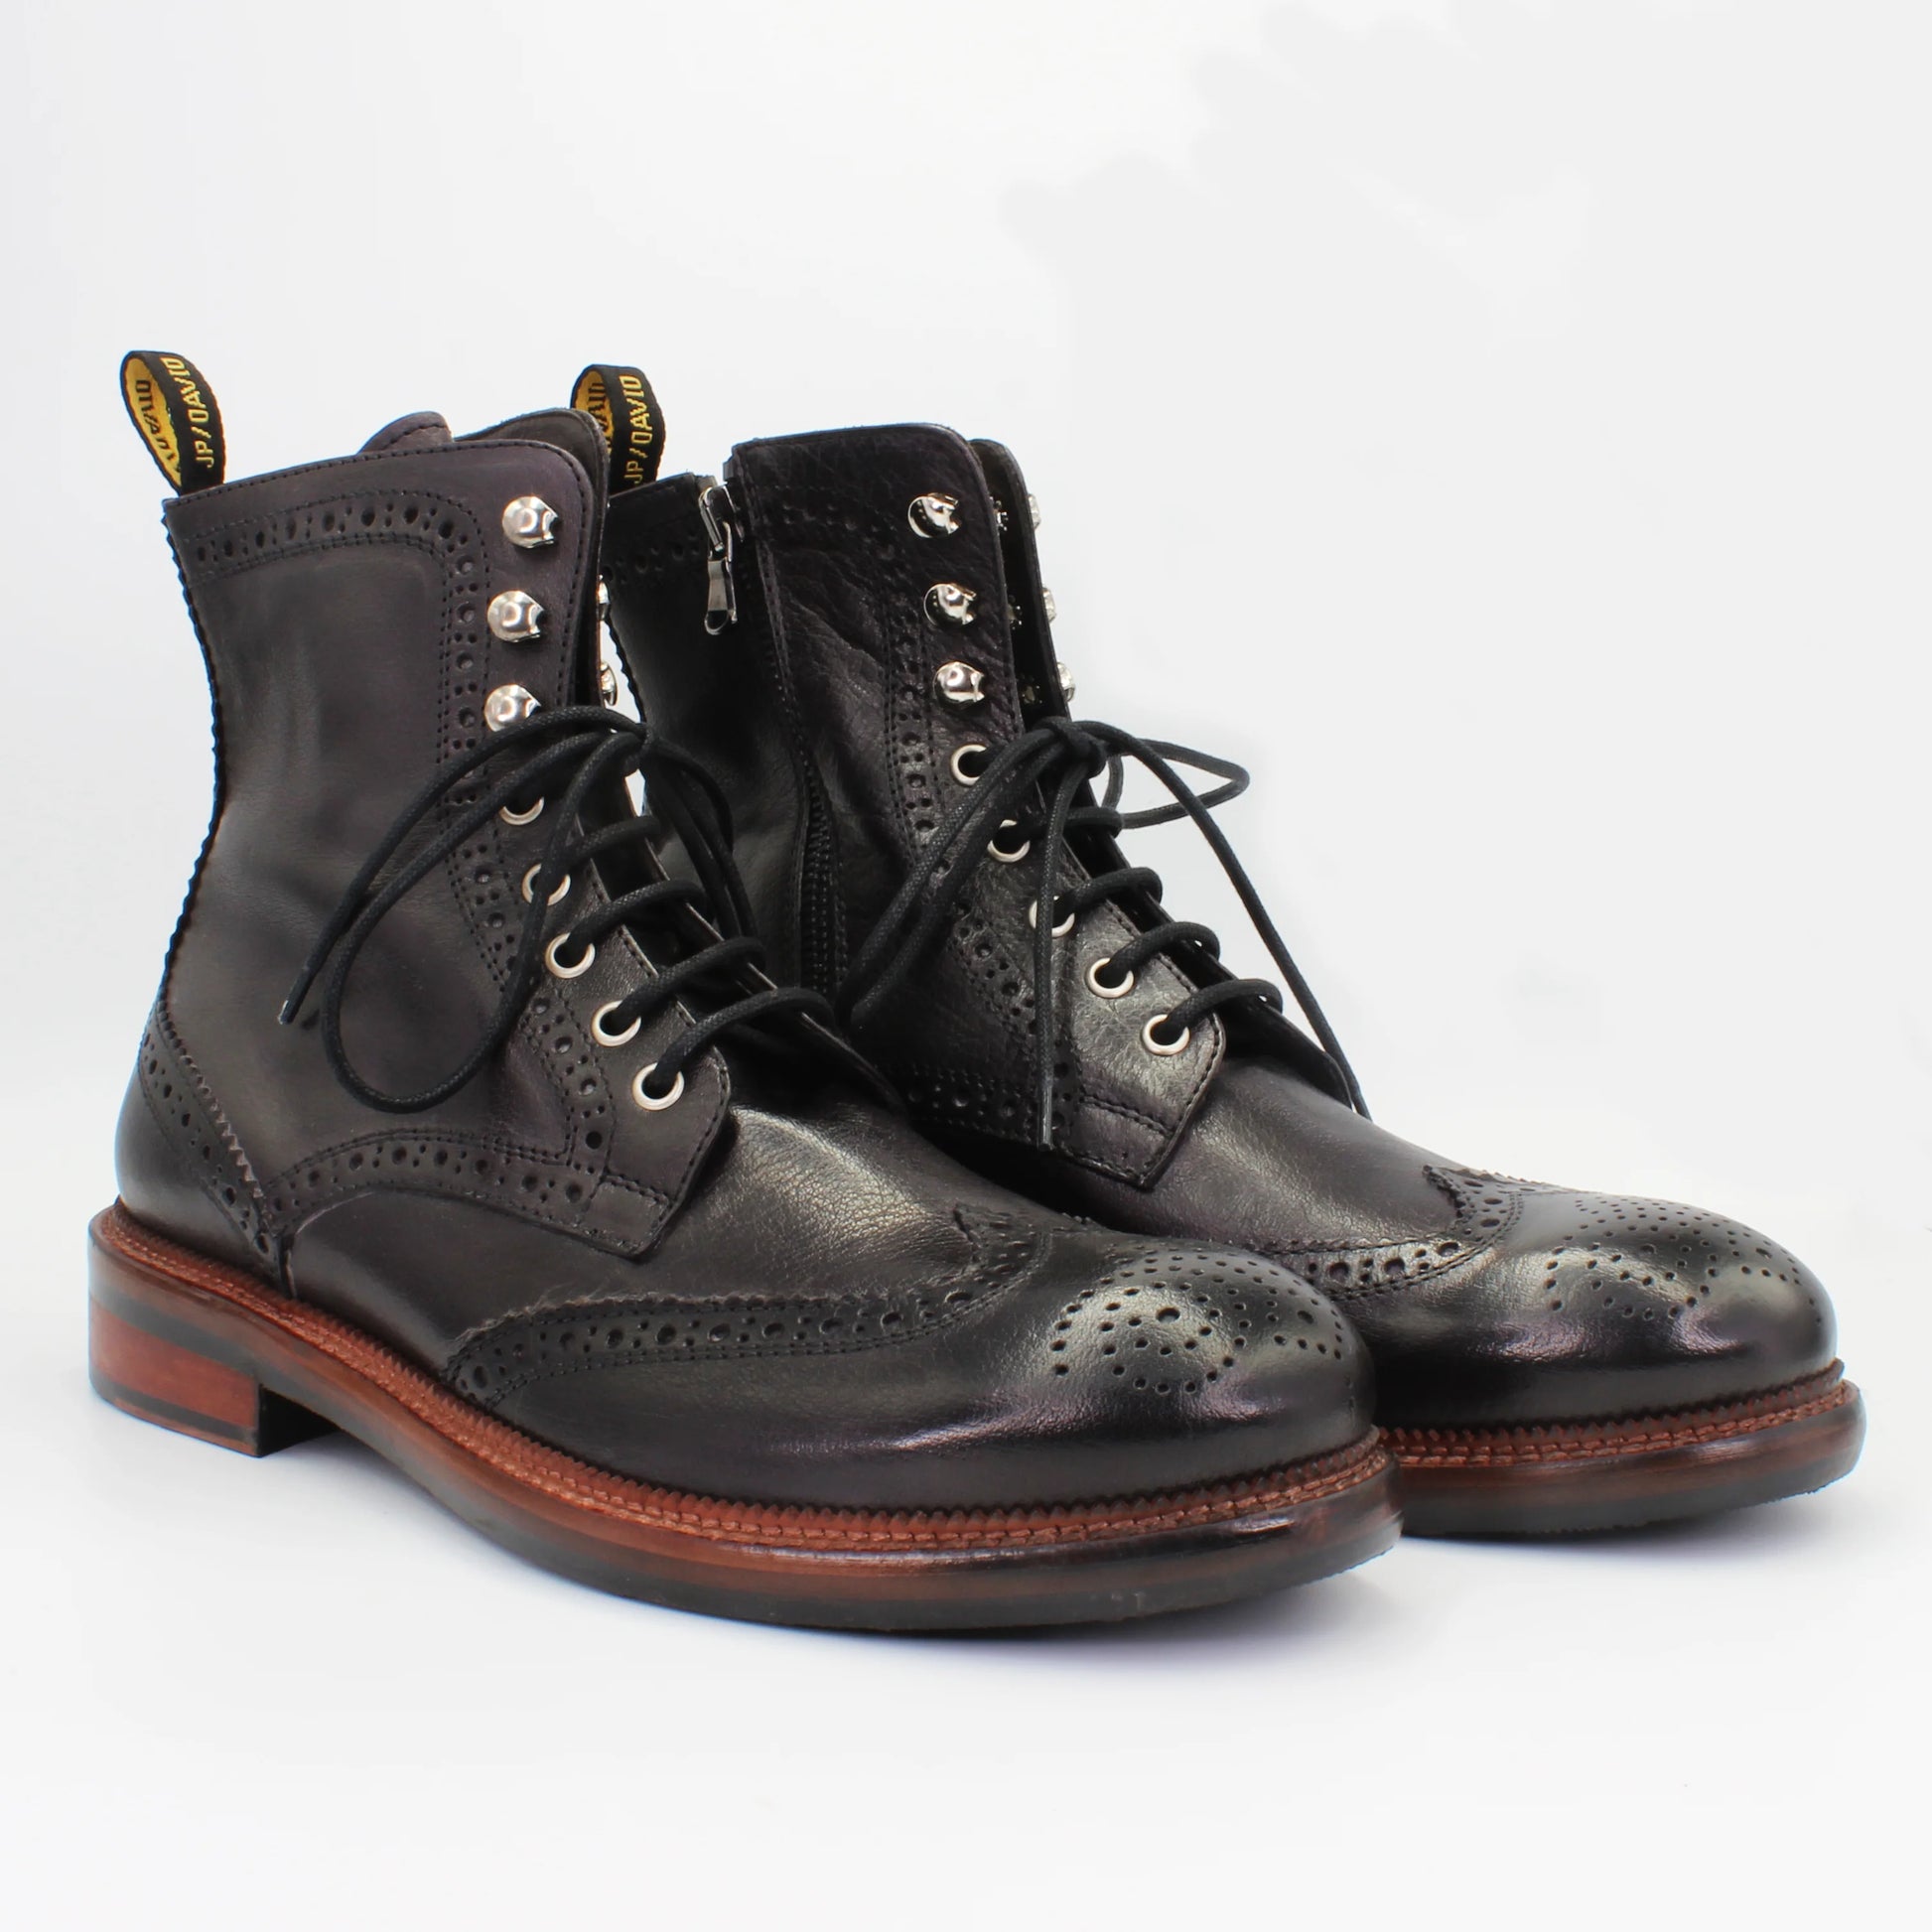 Shop Handmade Italian Leather Lace-Up Boot in Candy Black Red (JP37340/1)  or browse our range of hand-made Italian boots for men in leather or suede in-store at Aliverti Cape Town, or shop online. We deliver in South Africa & offer multiple payment plans as well as accept multiple safe & secure payment methods.